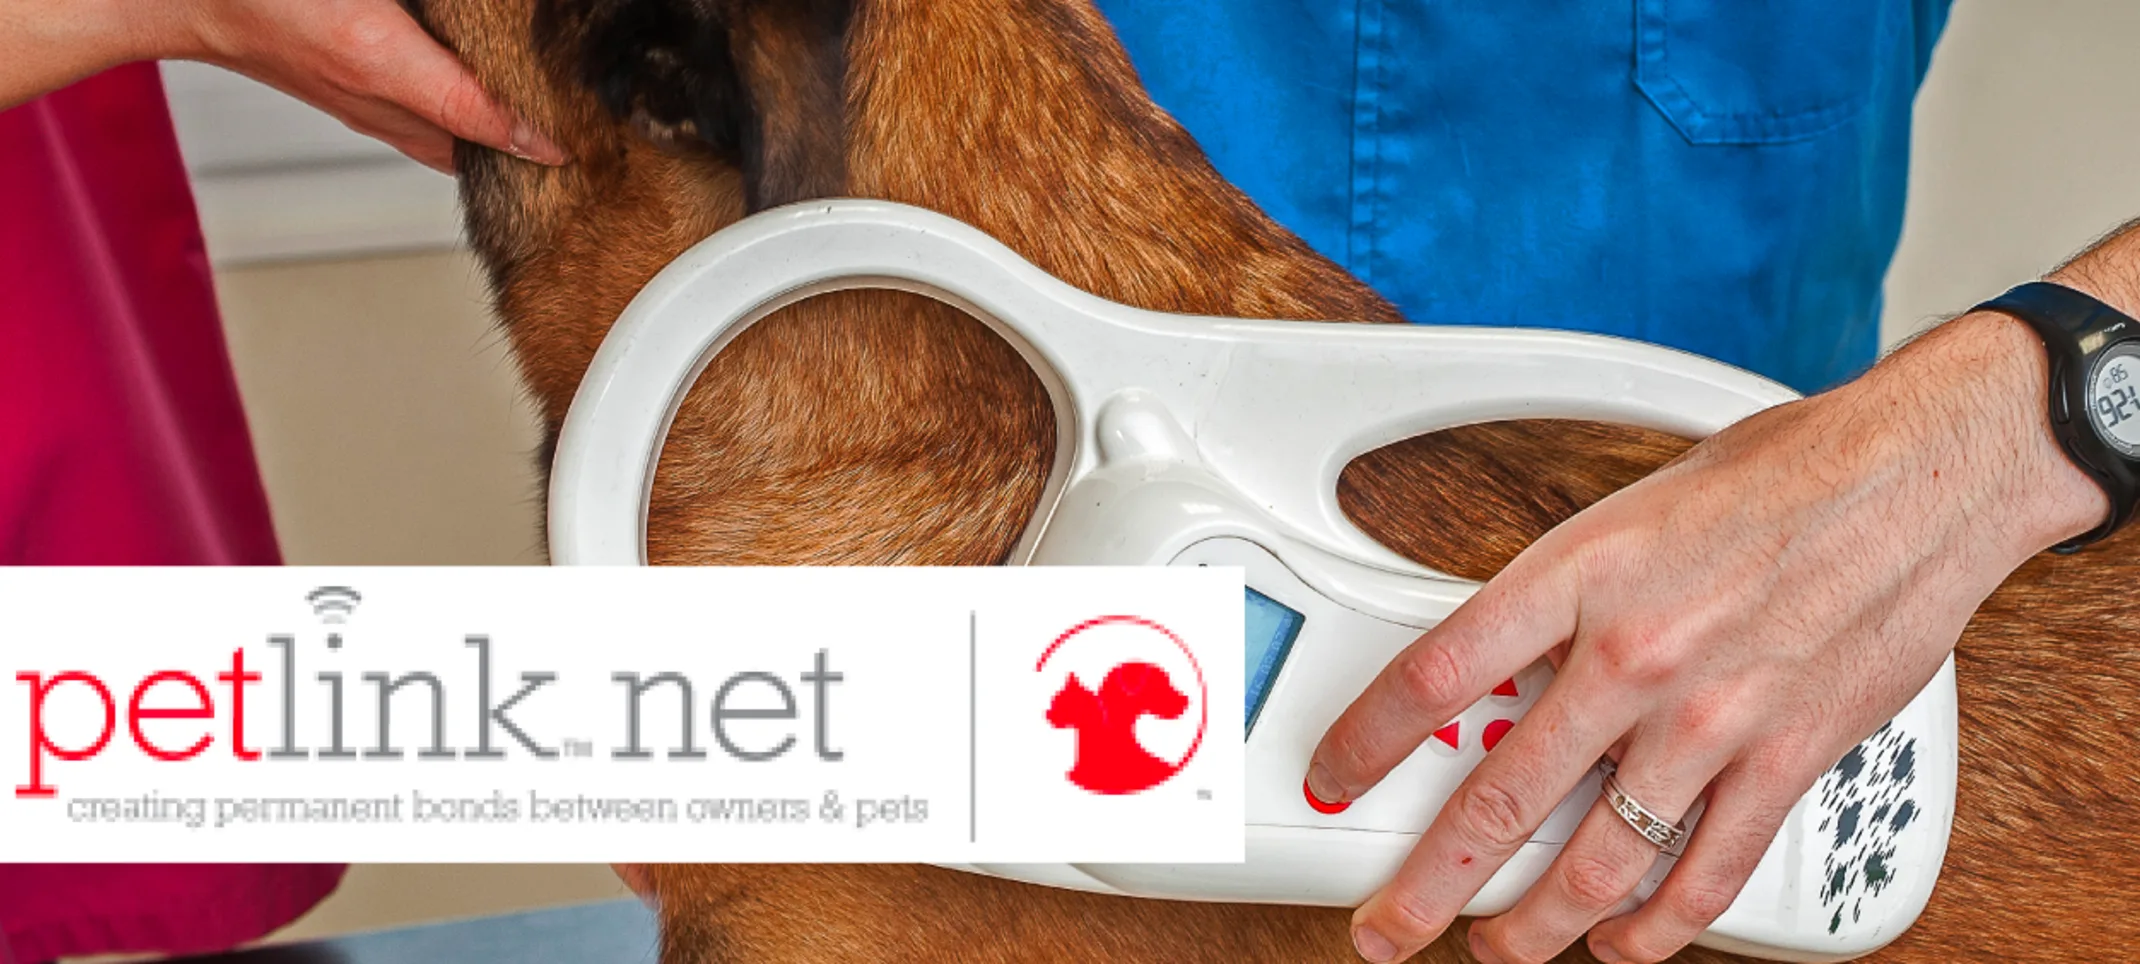 Microchipping dog with petlink logo